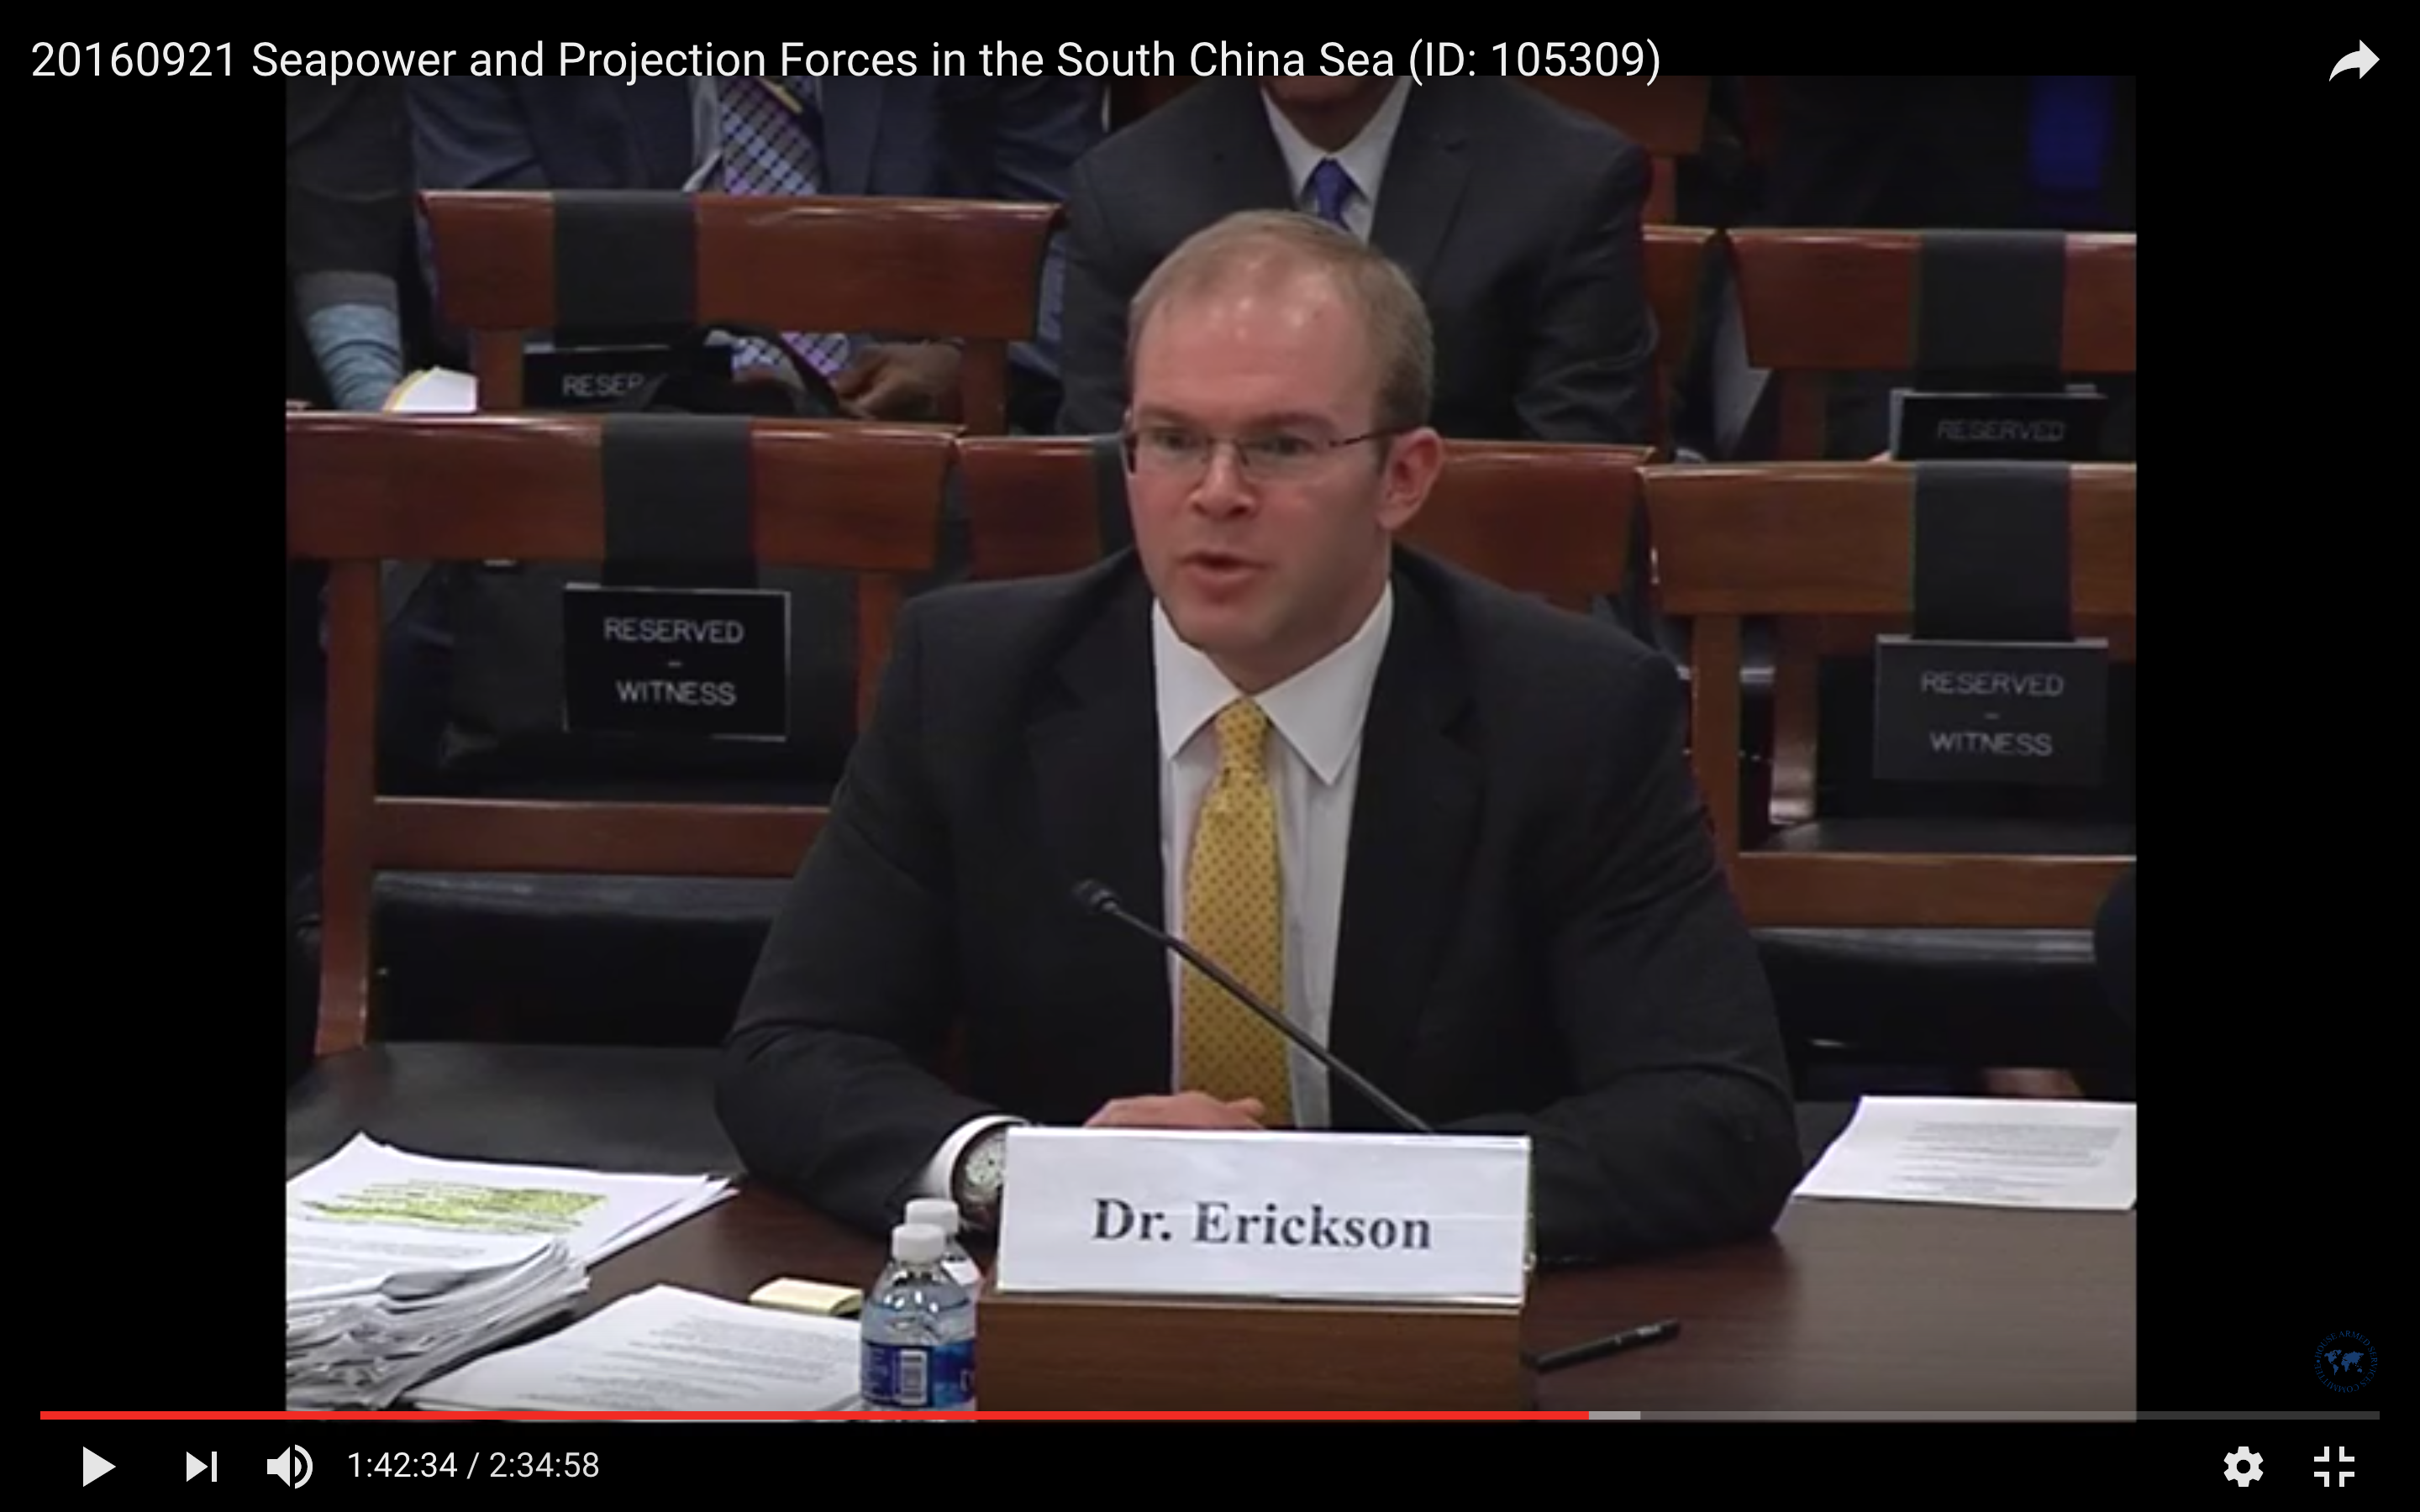 dr-andrew-s-erickson_testimony_house-armed-services-committee_spfs_south-china-sea-hearing_maritime-militia_20160921_photo-3